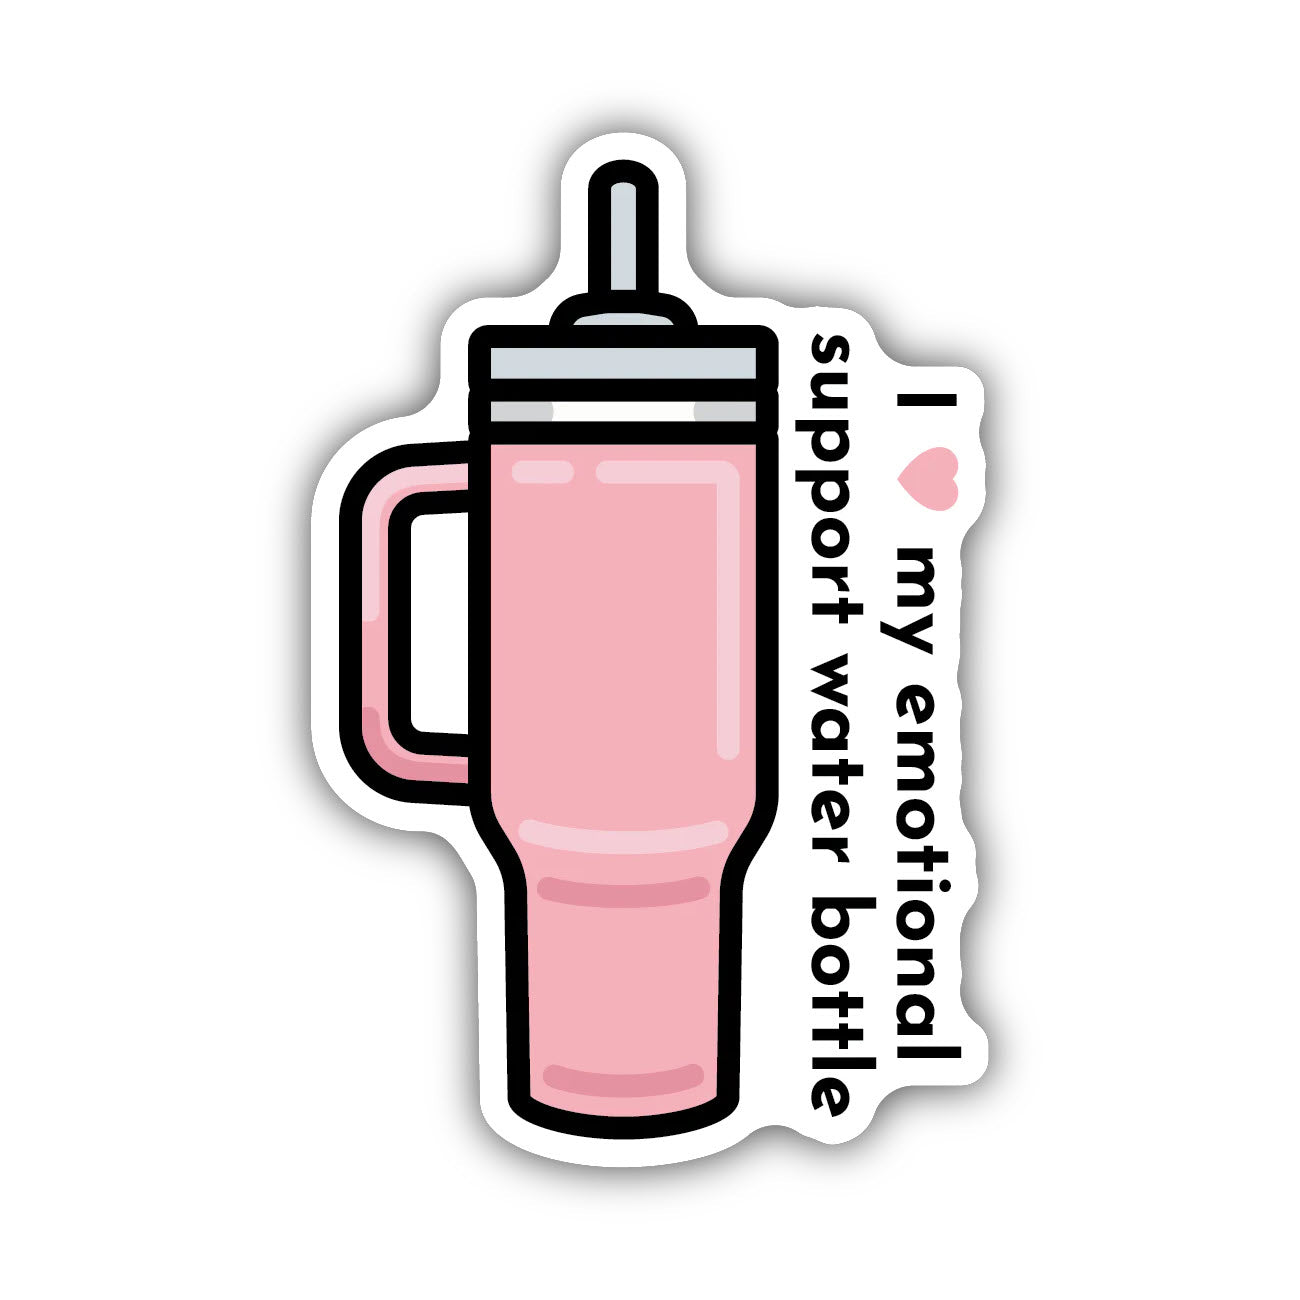 Stickers Northwest Emotional Support sticker of a pink, waterproof water bottle with the pun "I support my emotional water bottle," crafted from high-quality vinyl.